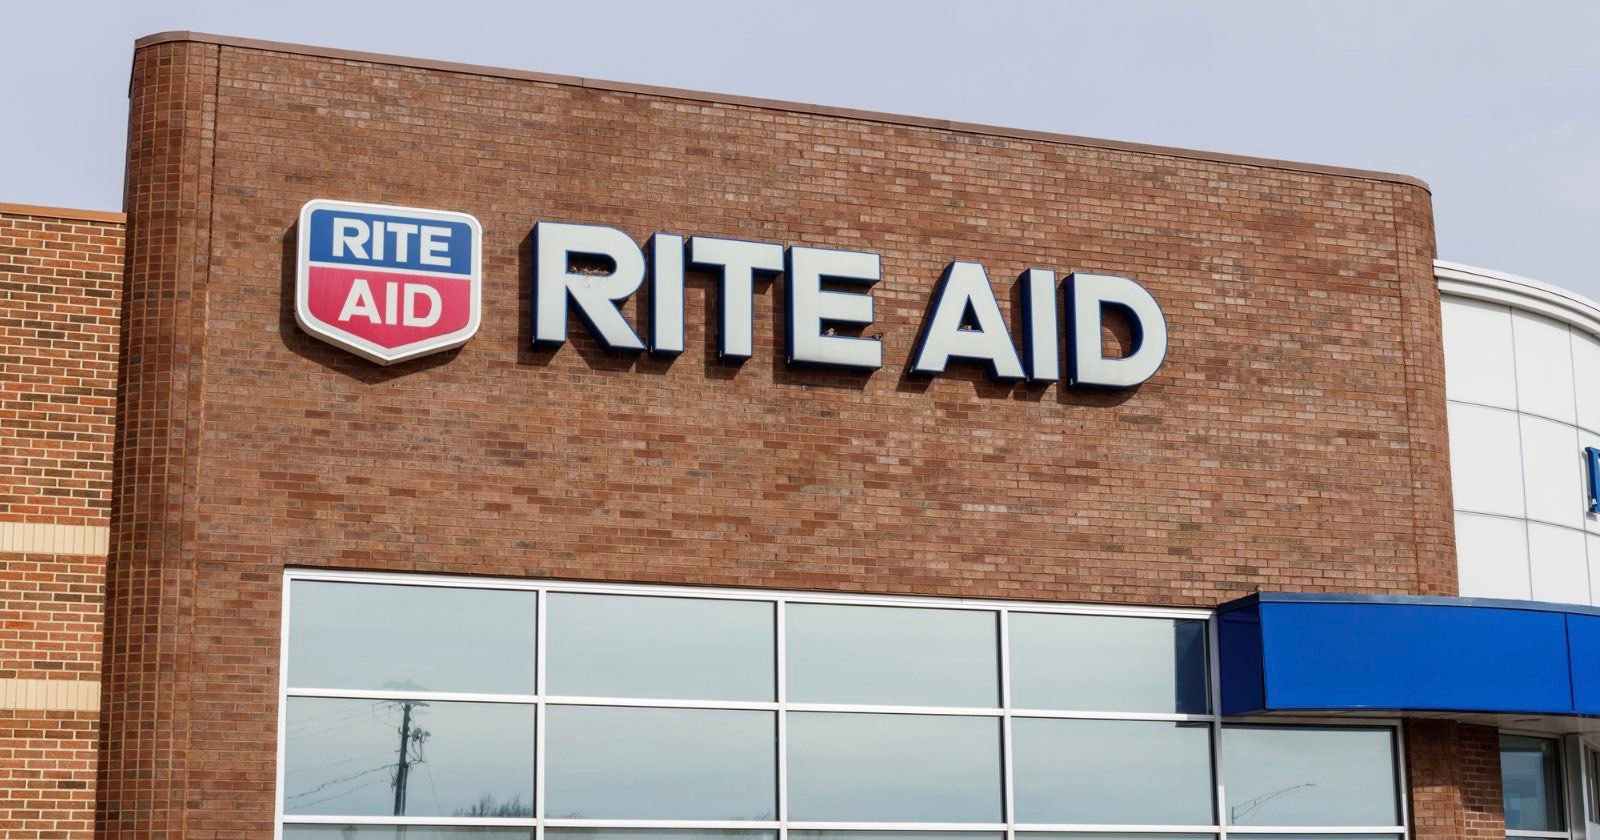 Rite Aid Banned From Facial Recognition Tech After Reckless Use